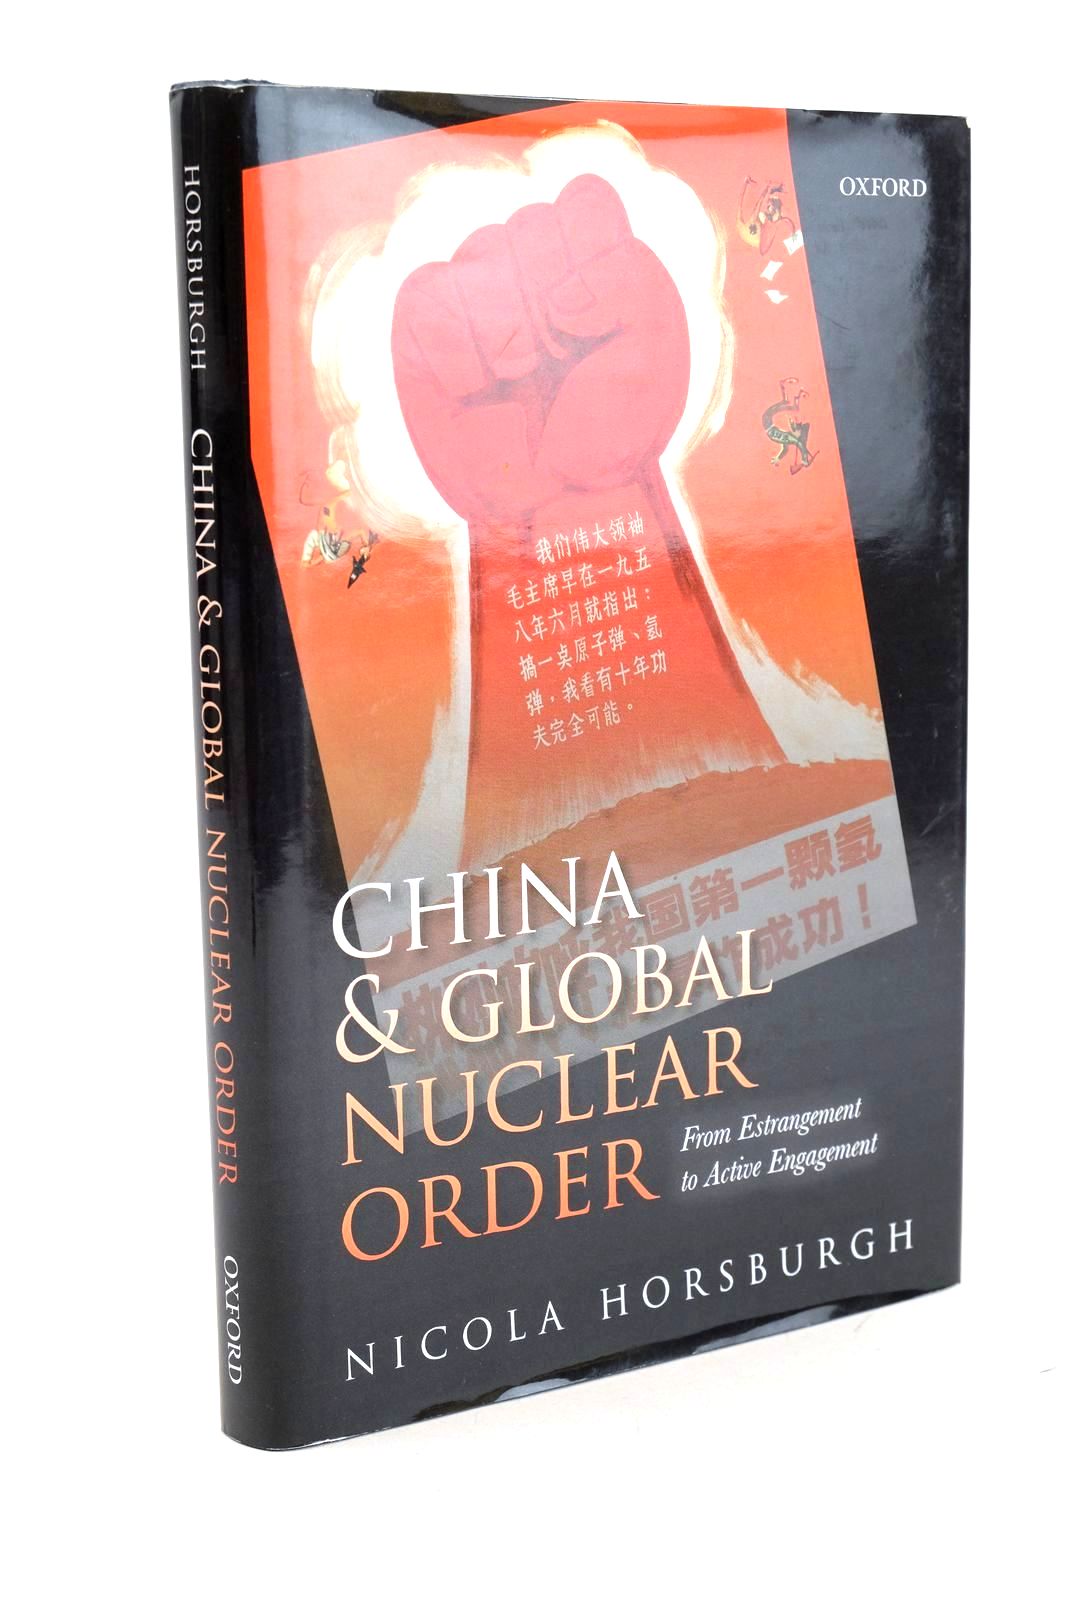 Photo of CHINA AND GLOBAL NUCLEAR ORDER FROM ESTRANGEMENT TO ACTIVE ENGAGEMENT written by Horsburgh, Nicola published by Oxford University Press (STOCK CODE: 1327148)  for sale by Stella & Rose's Books